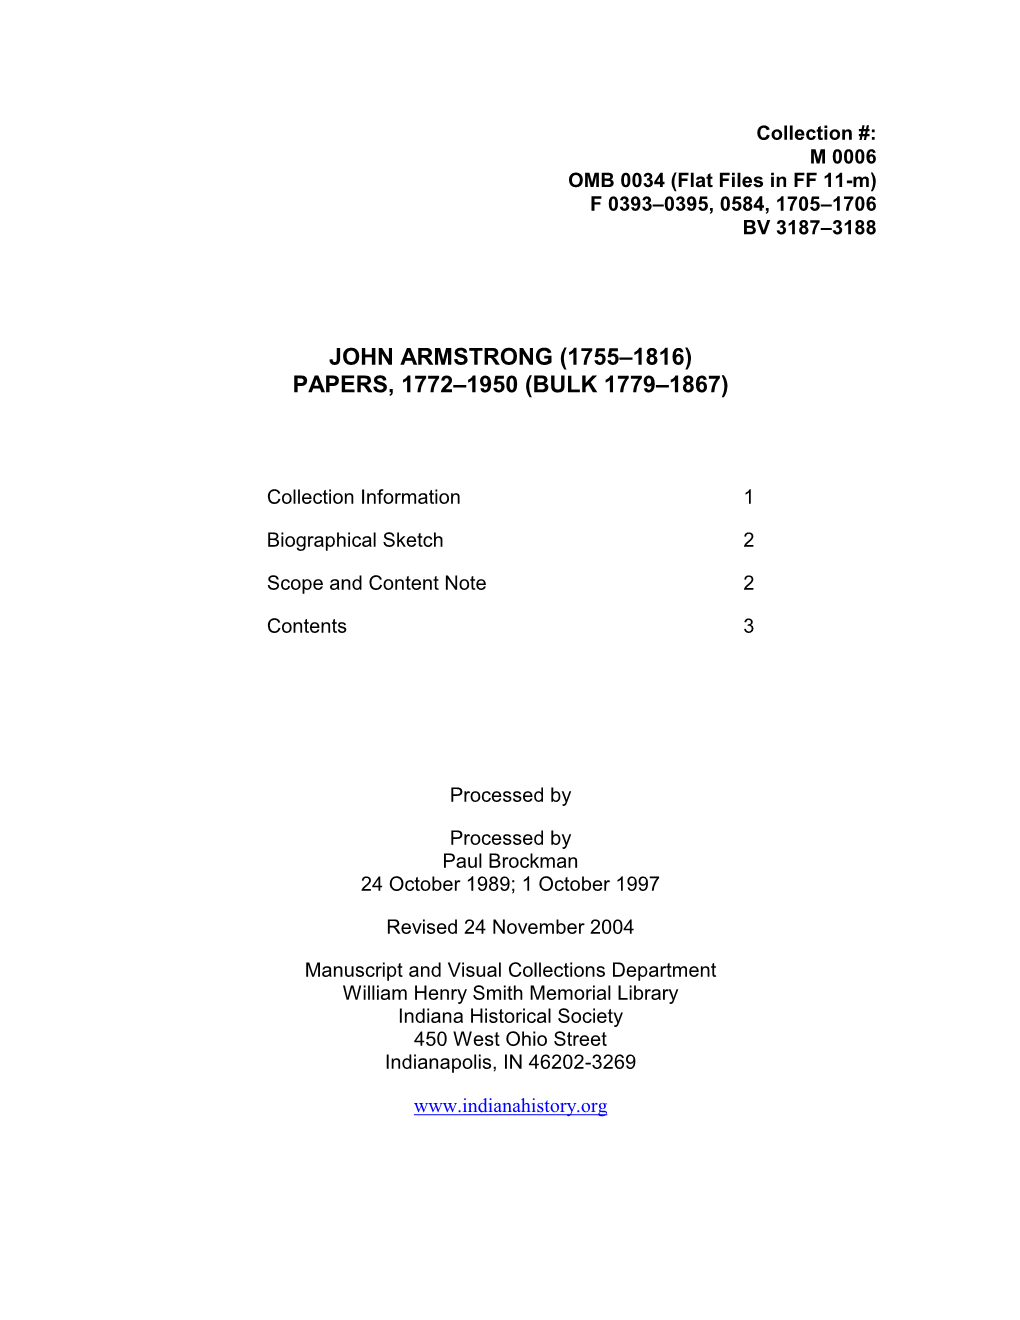 John-Armstrong-Papers